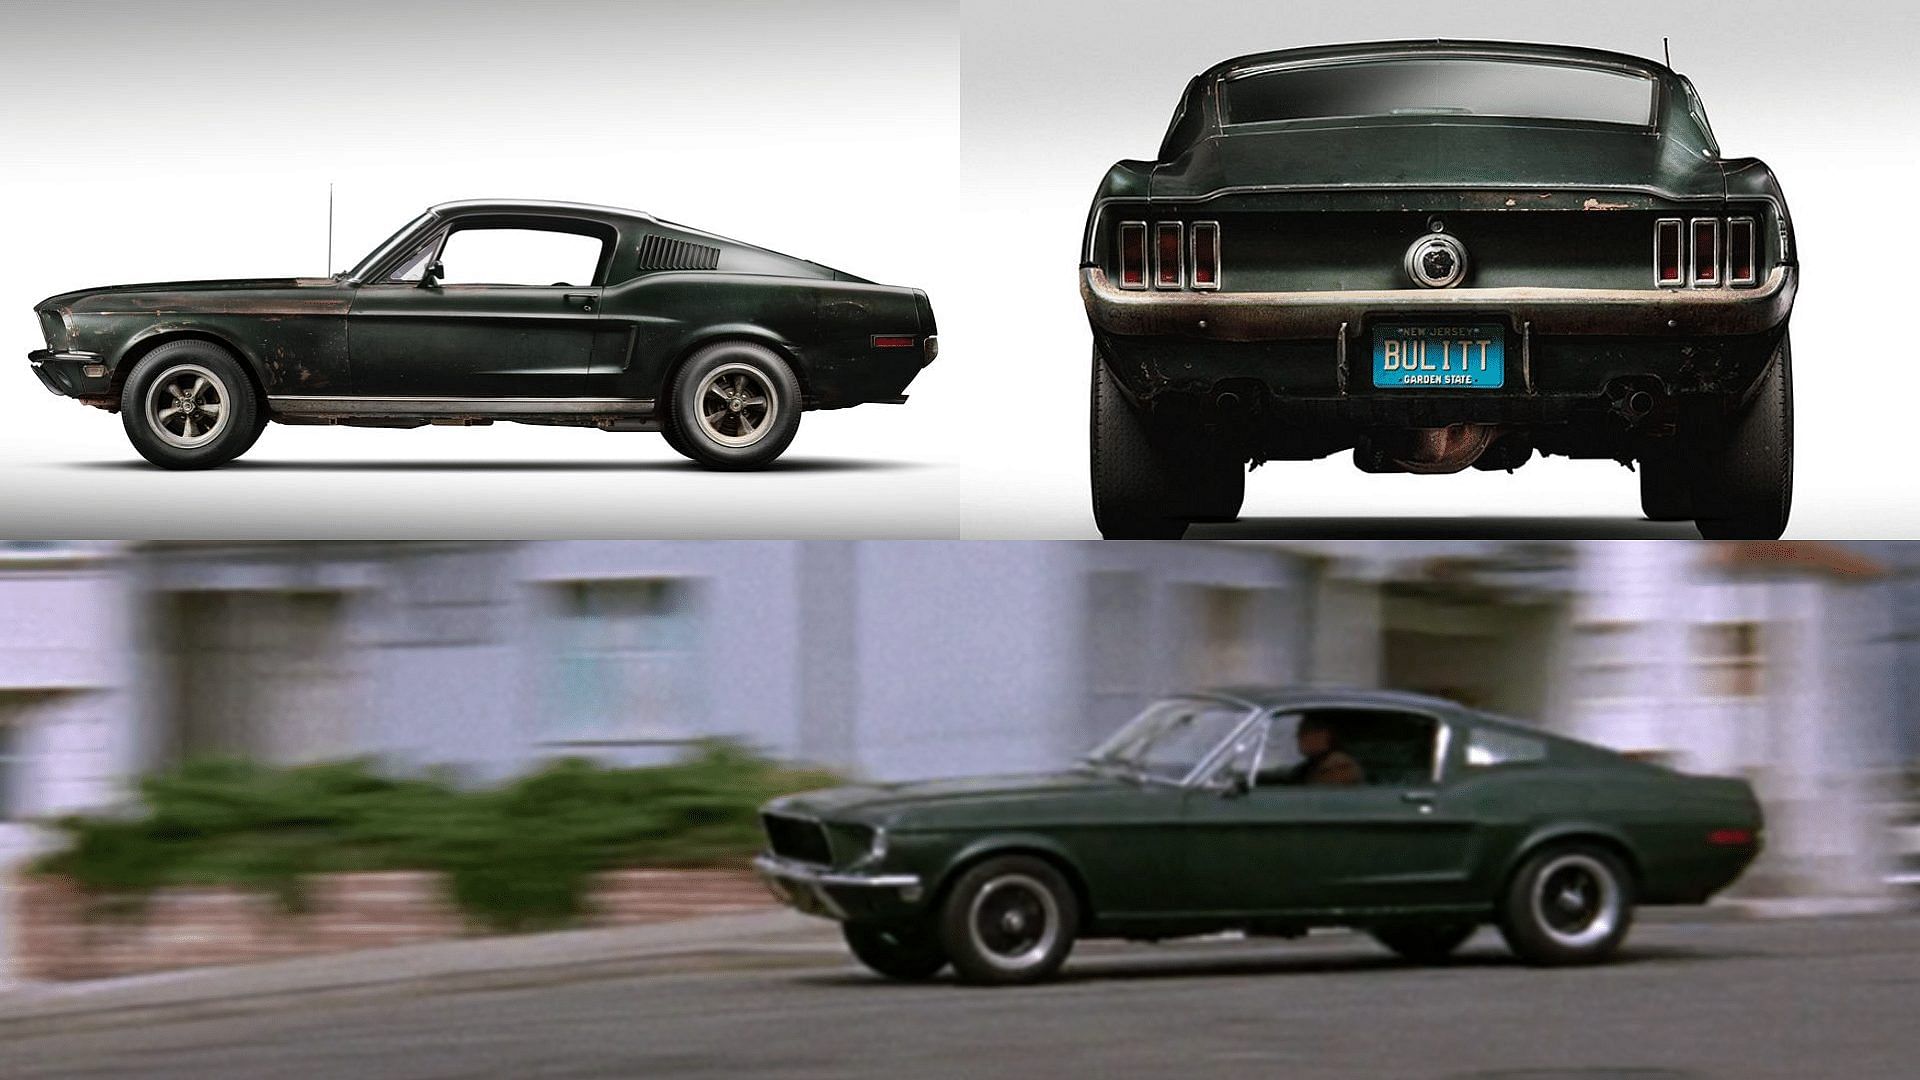 1967 Ford Bullitt Mustang rear and side view